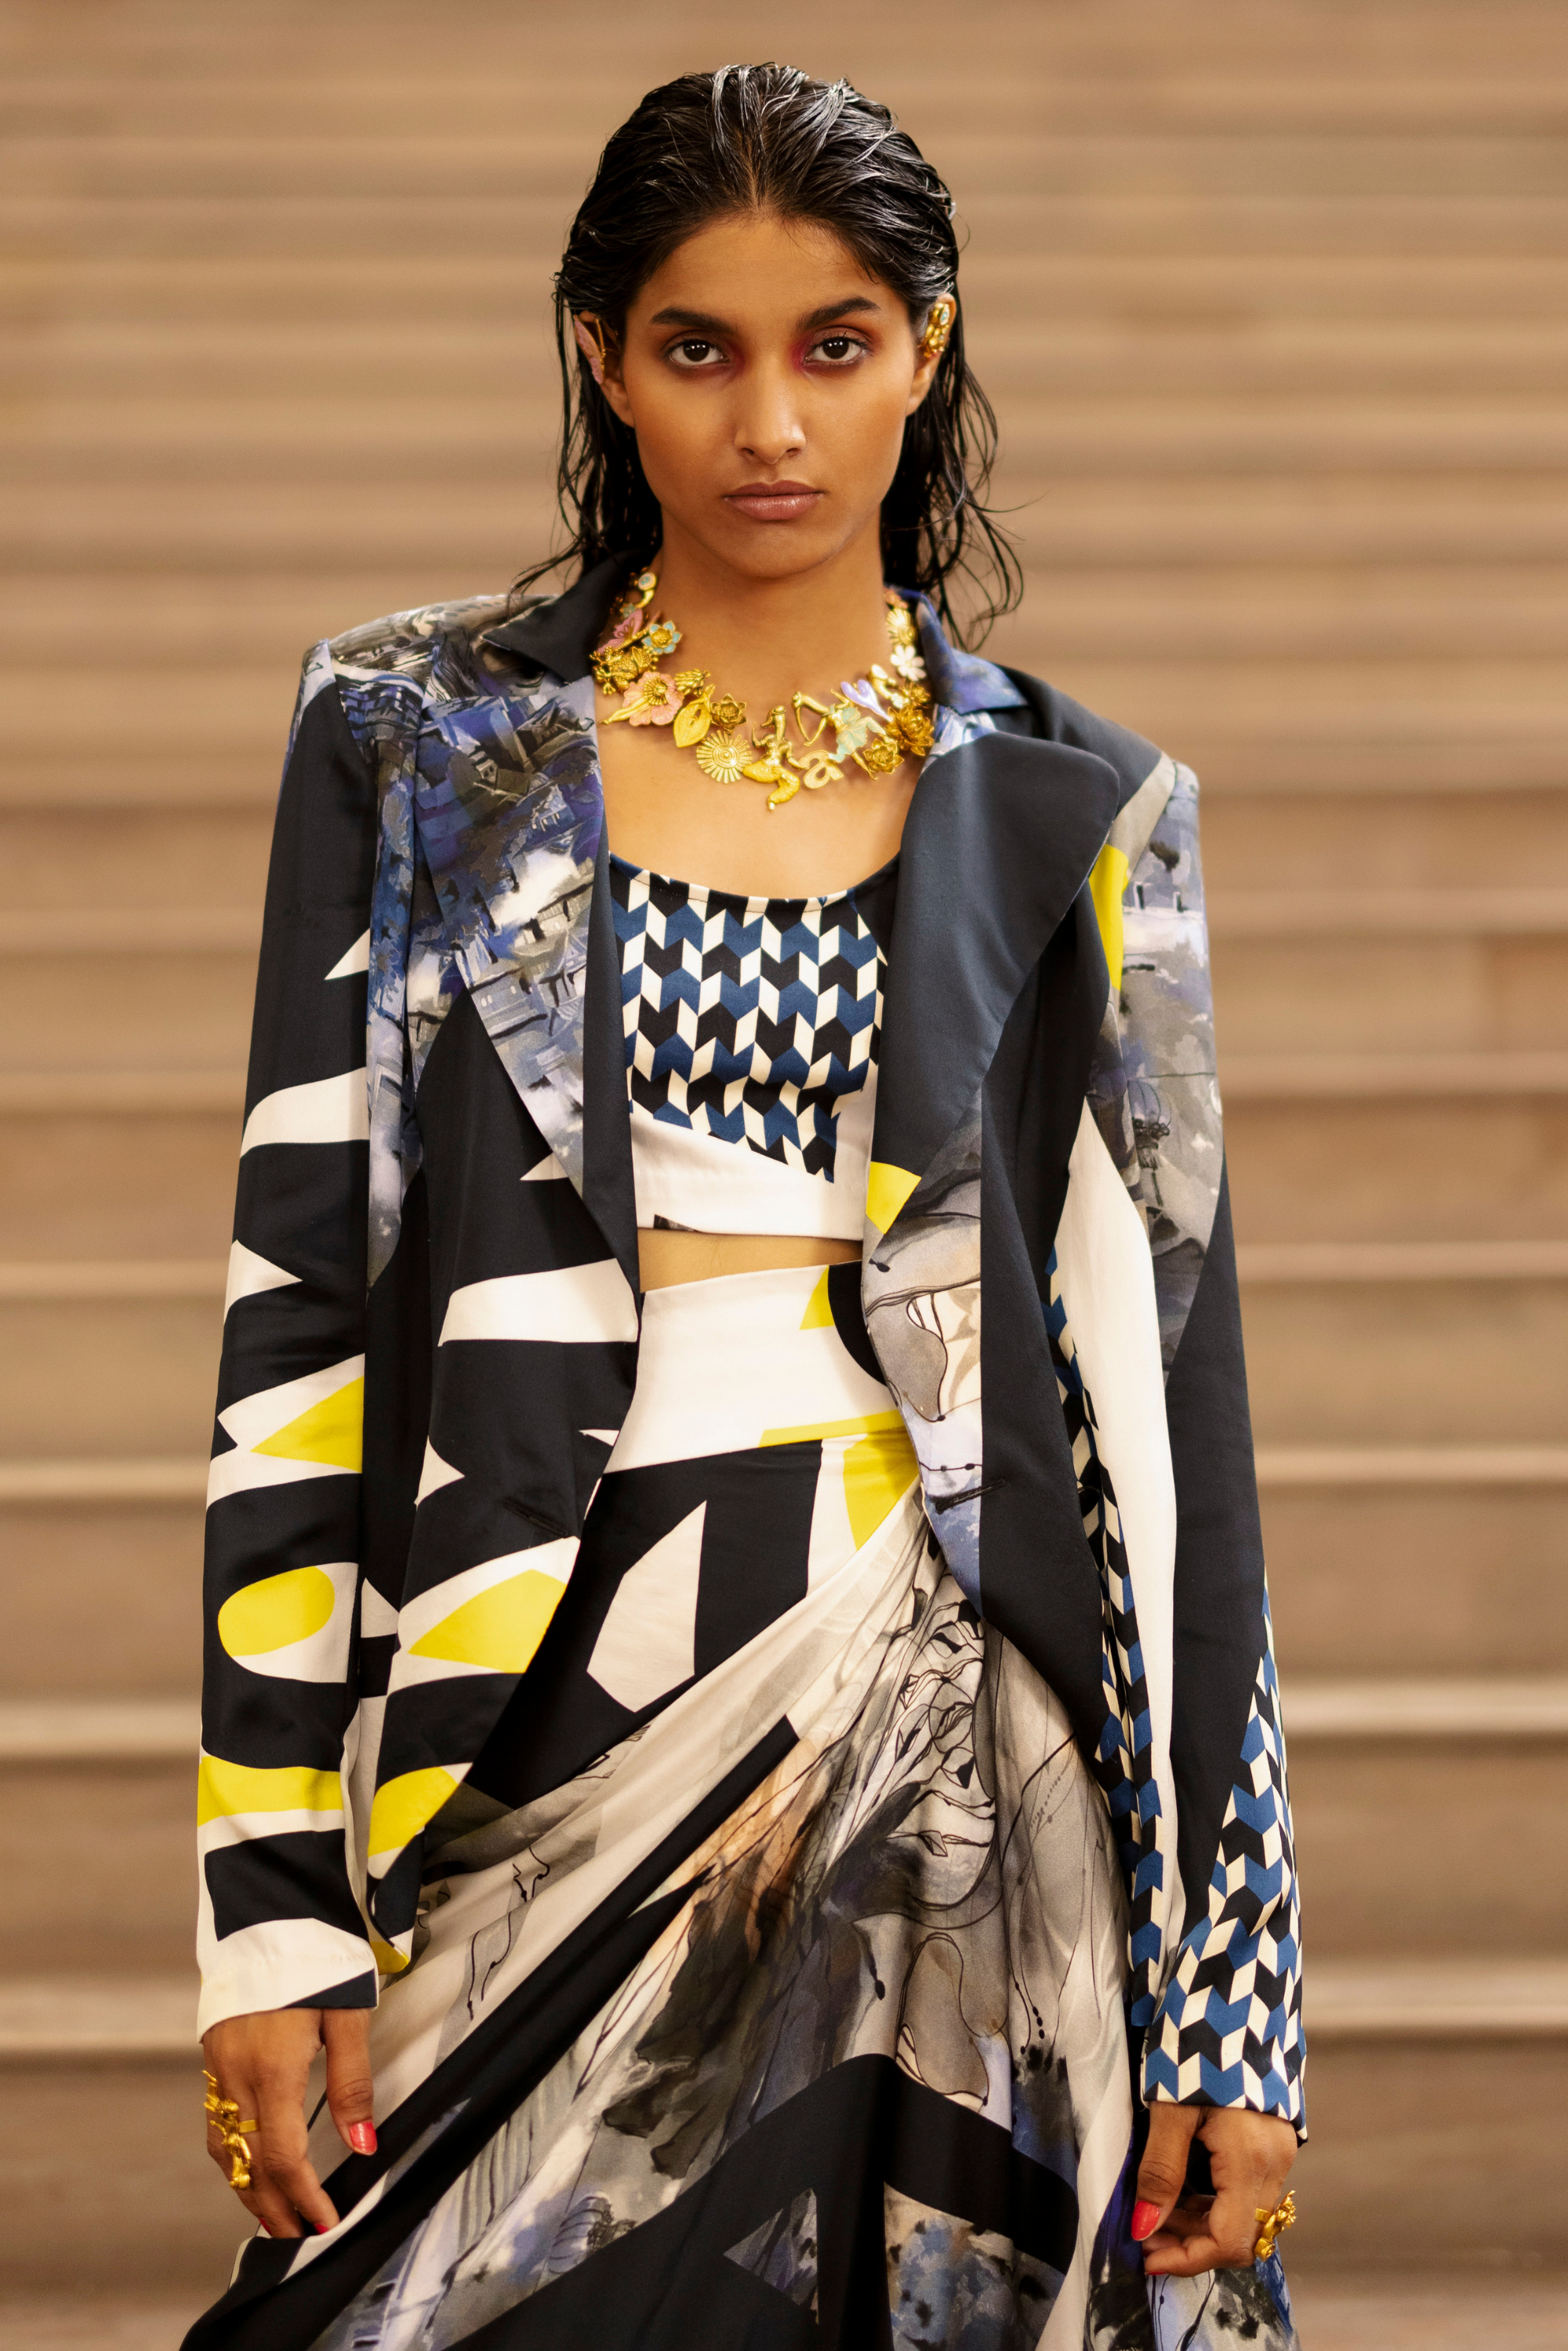 Script Print Blazer With Skirt And Top